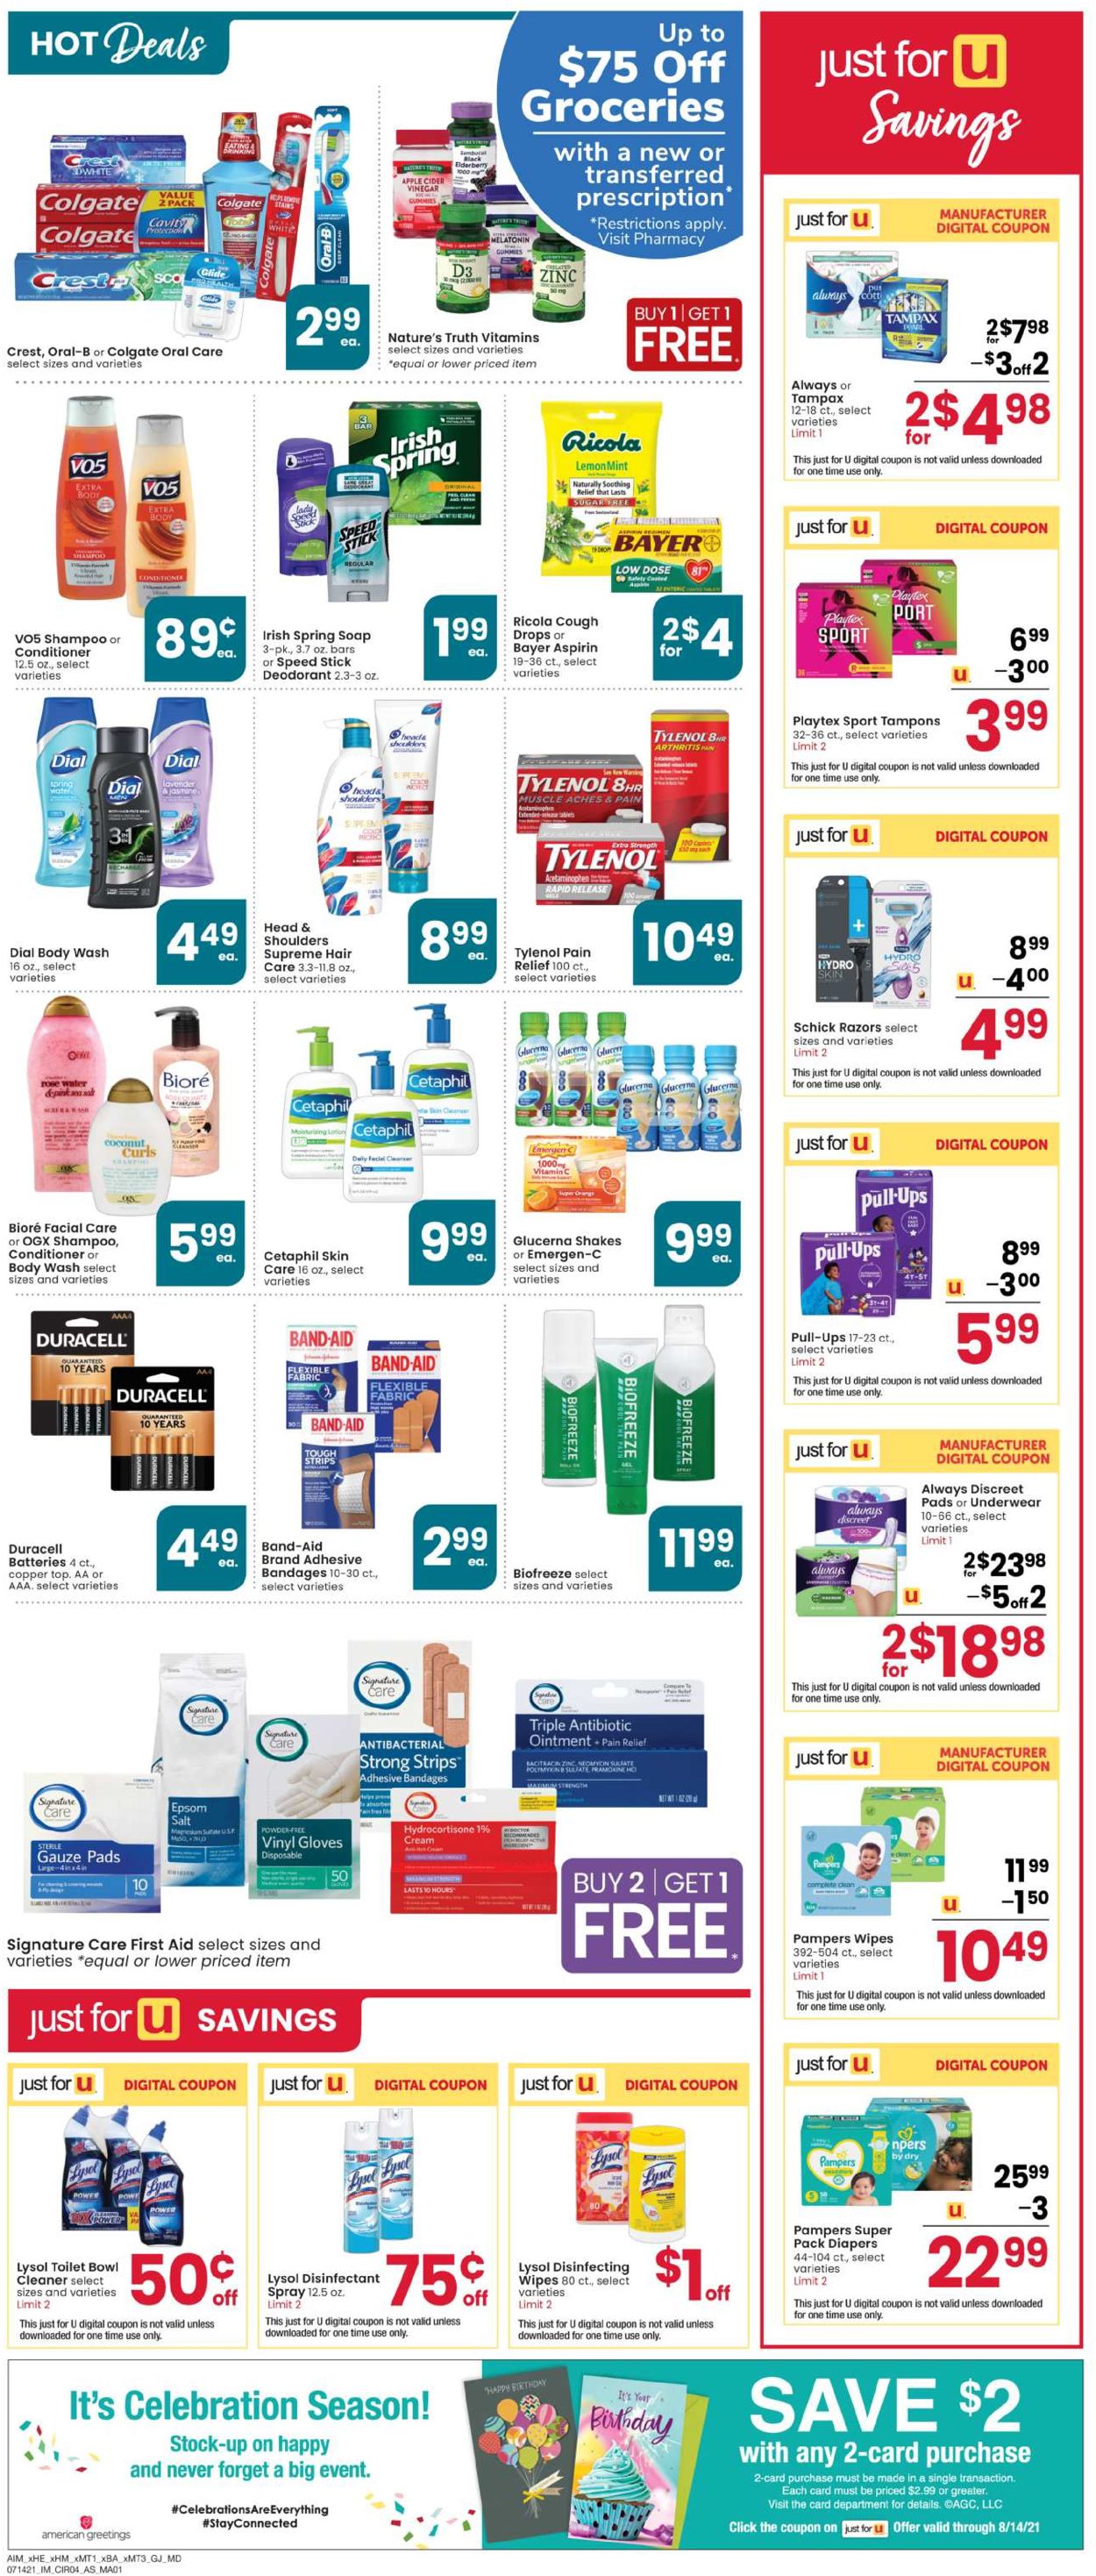 Albertsons Current weekly ad 07/14 - 07/20/2021 [4] - frequent-ads.com